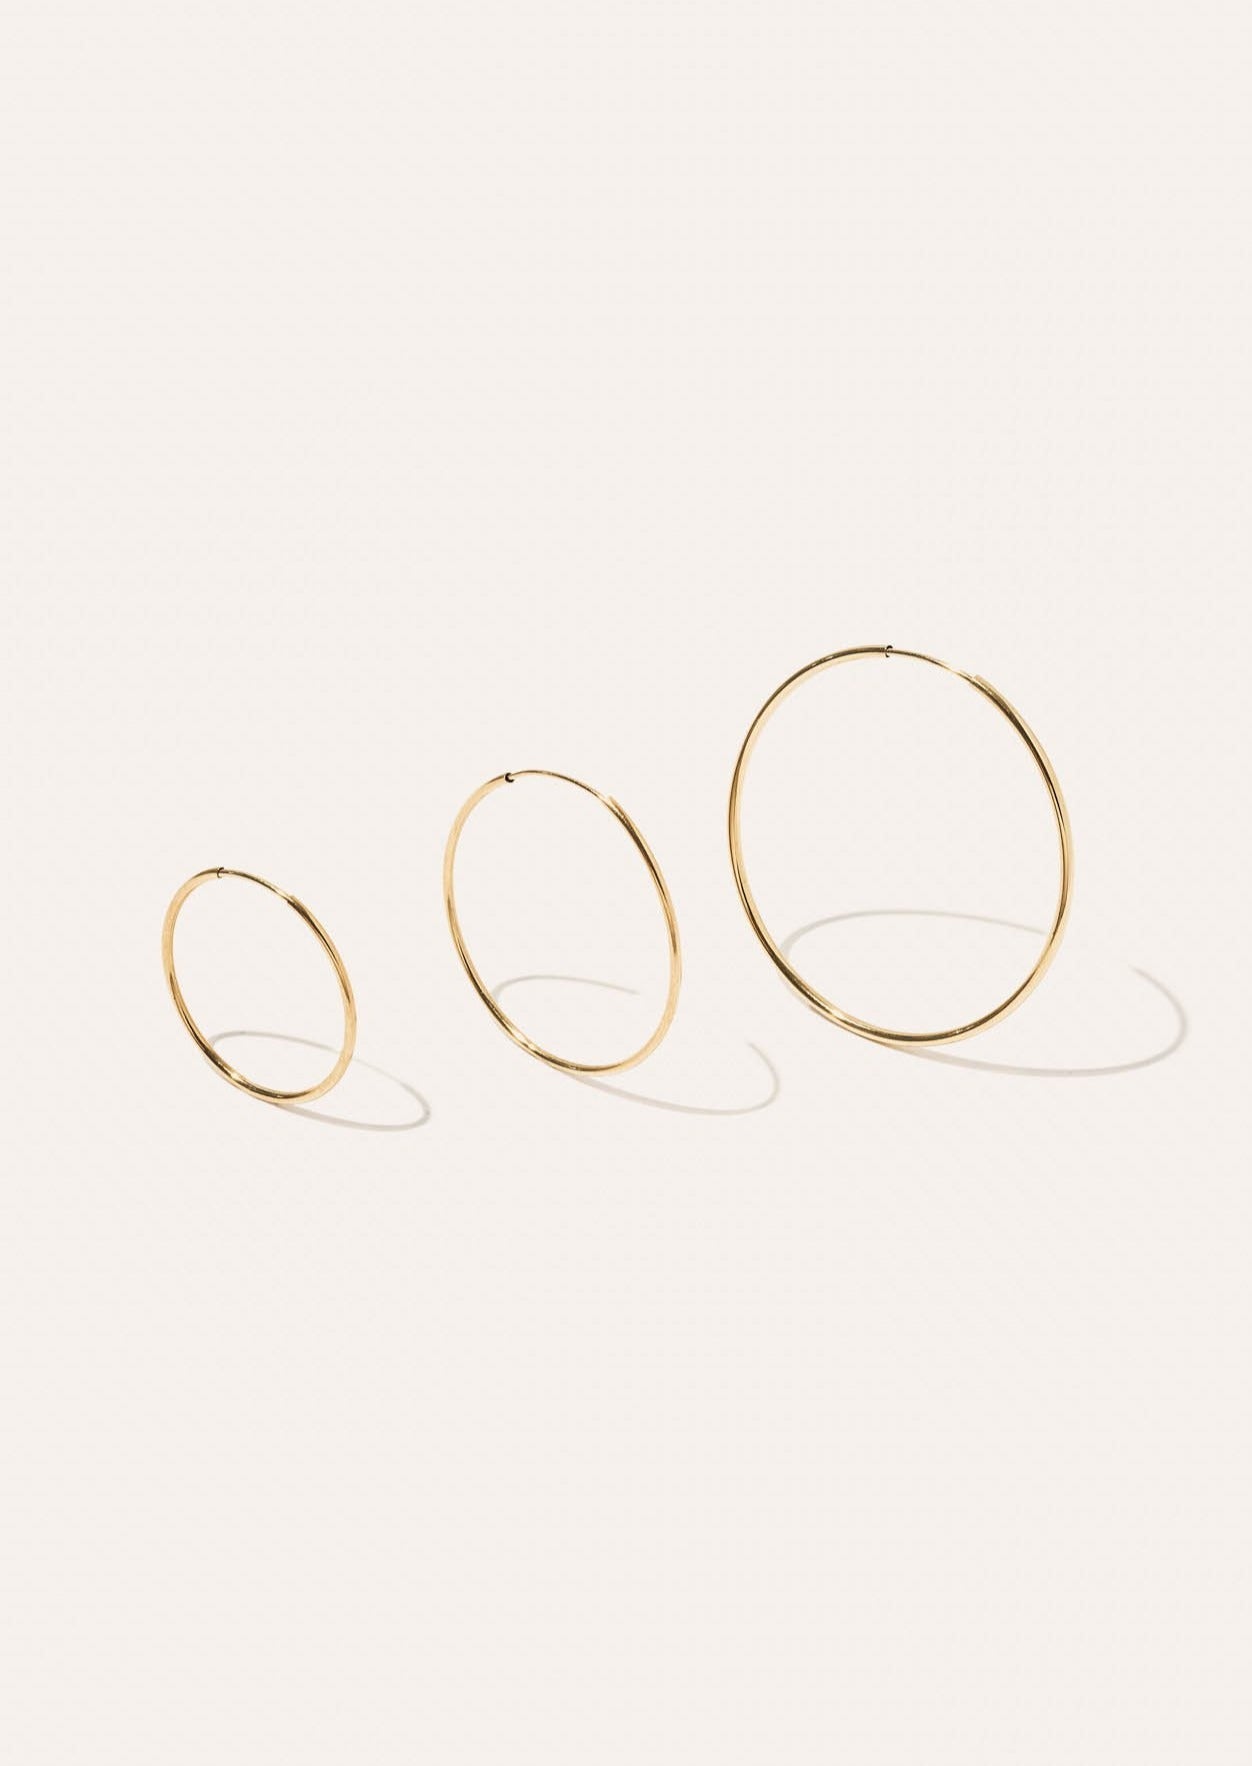 alt="Lightweight Hoop Earrings - Small compared to medium and large"